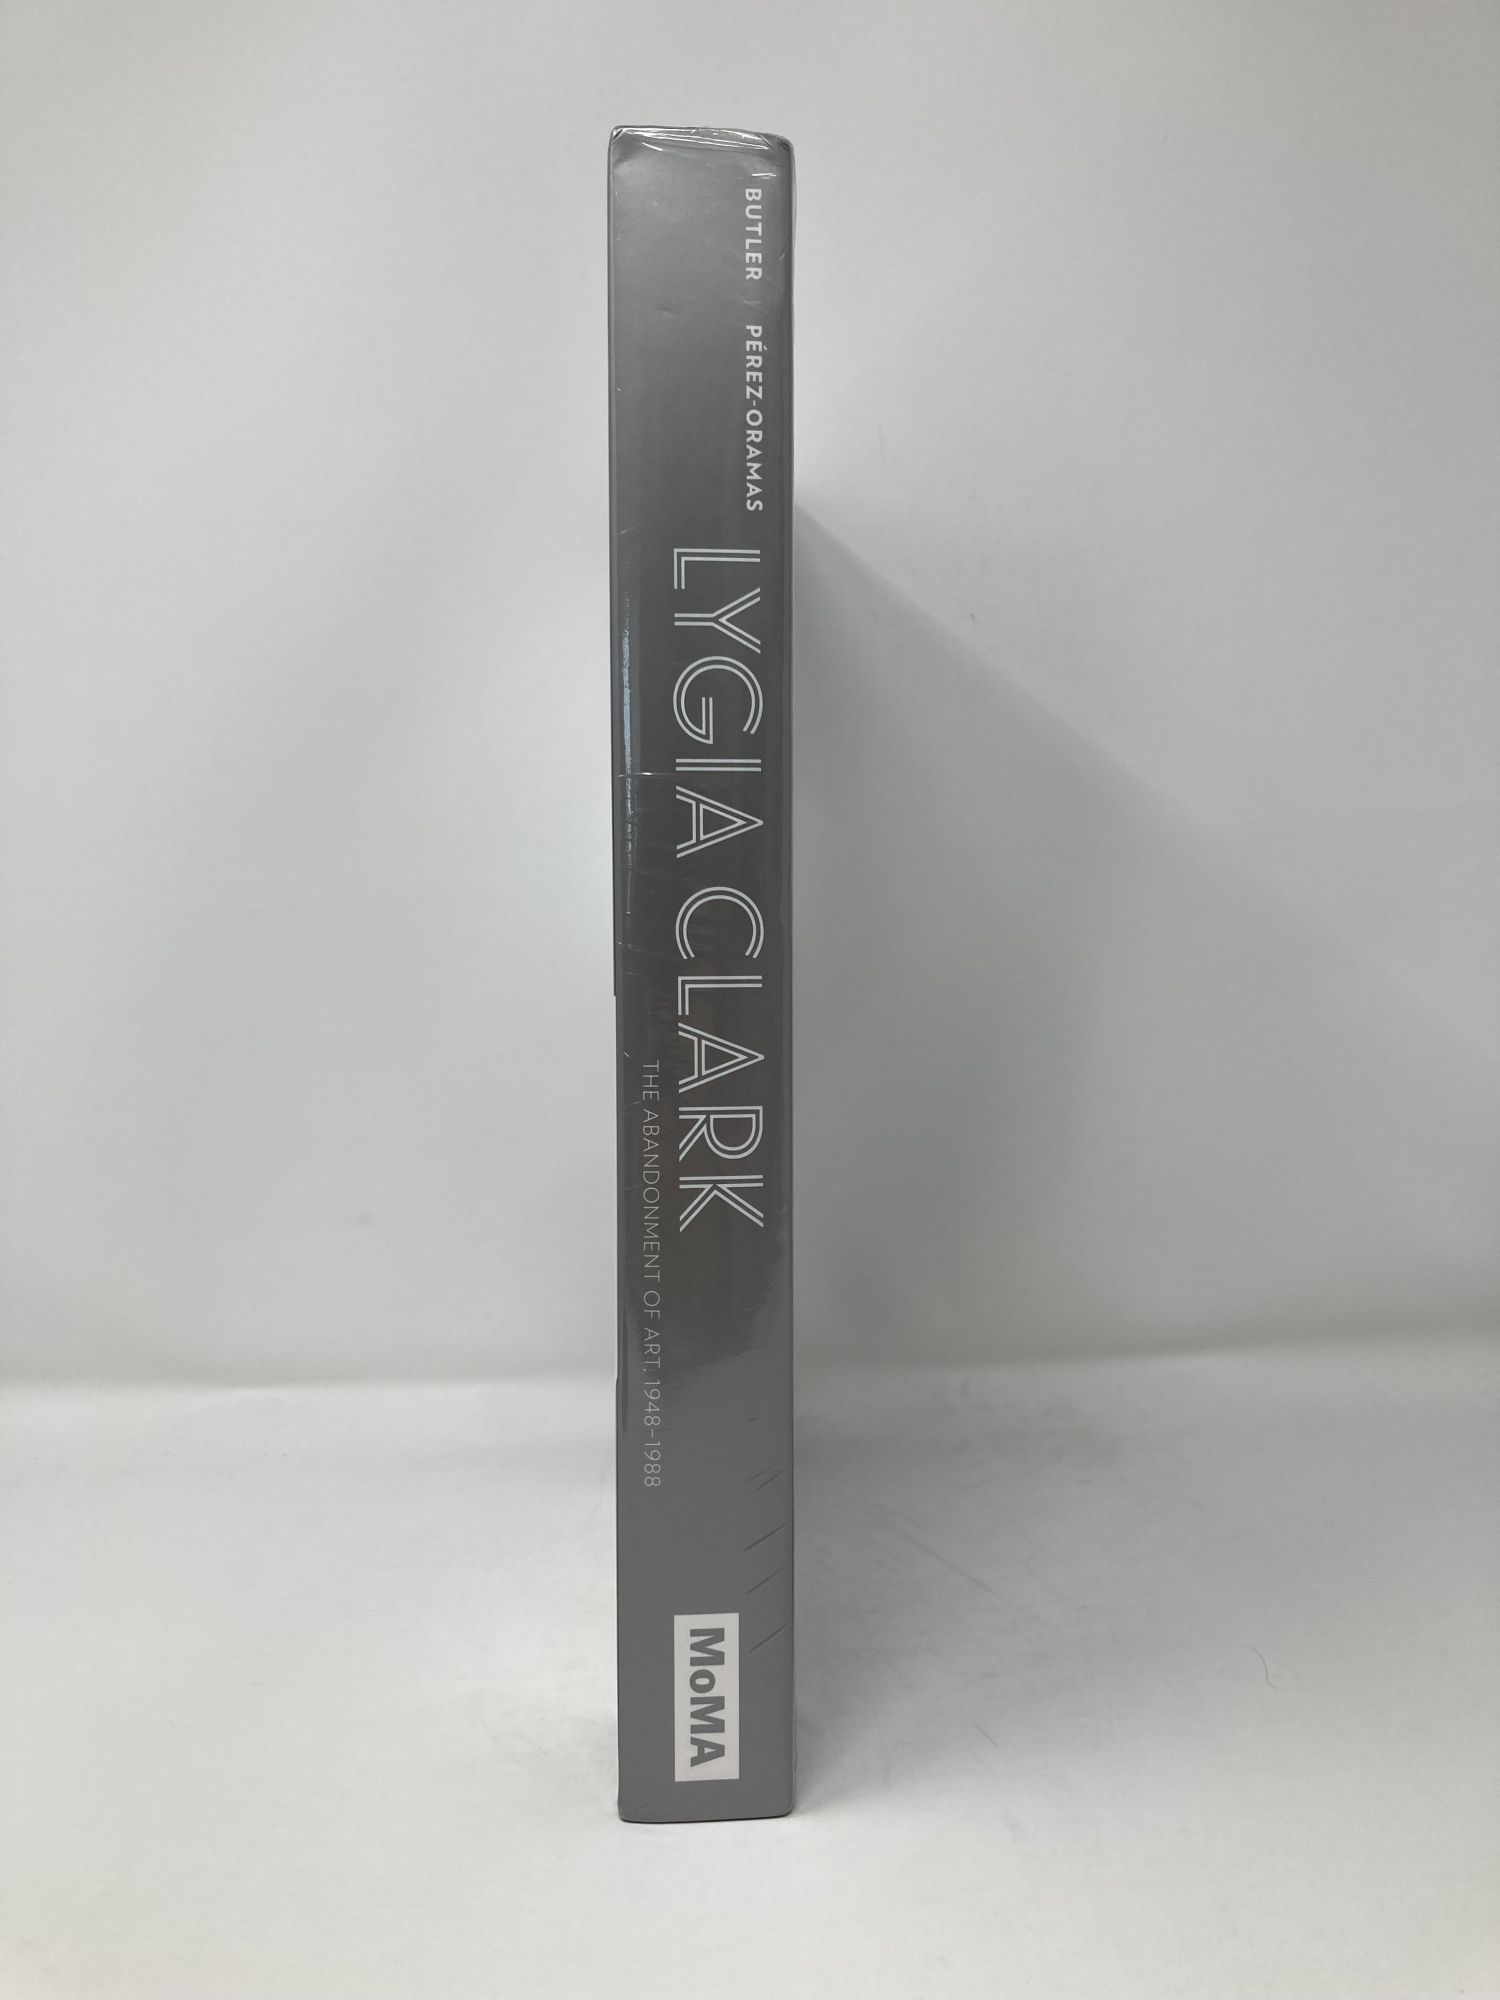 Lygia Clark: The Abandonment of Art by Clark, Lygia: Like New Hardcover ...